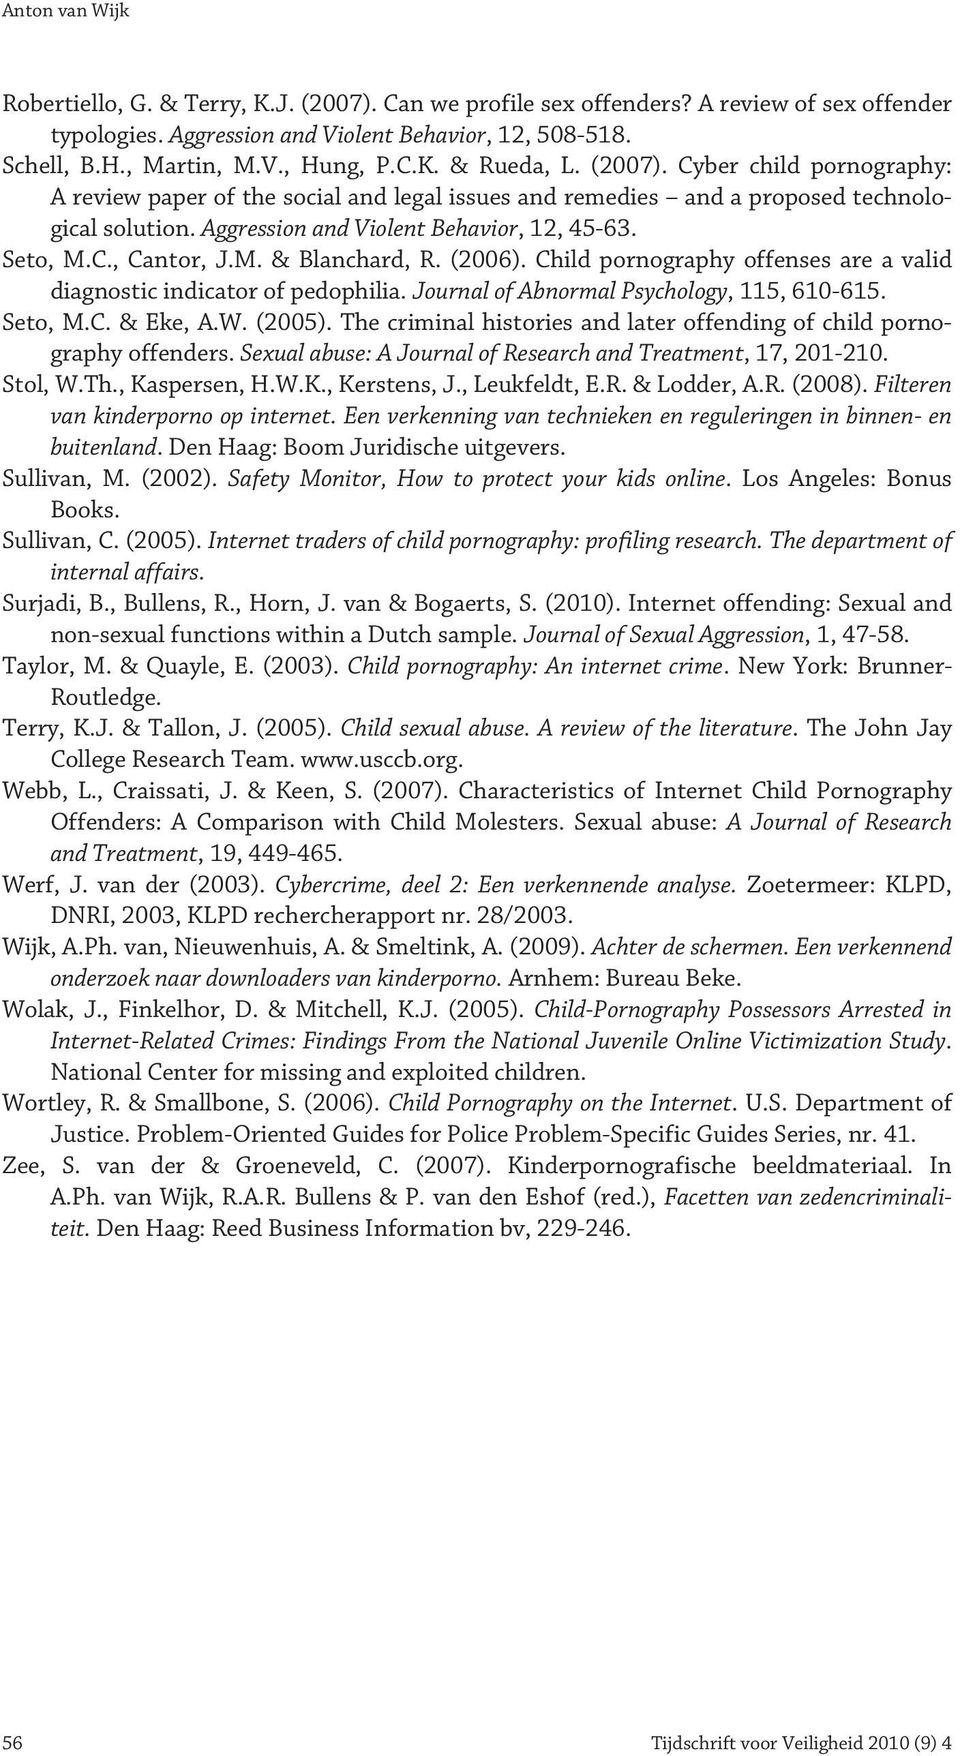 C., Cantor, J.M. & Blanchard, R. (2006). Child pornography offenses are a valid diagnostic indicator of pedophilia. Journal of Abnormal Psychology, 115, 610-615. Seto, M.C. & Eke, A.W. (2005).